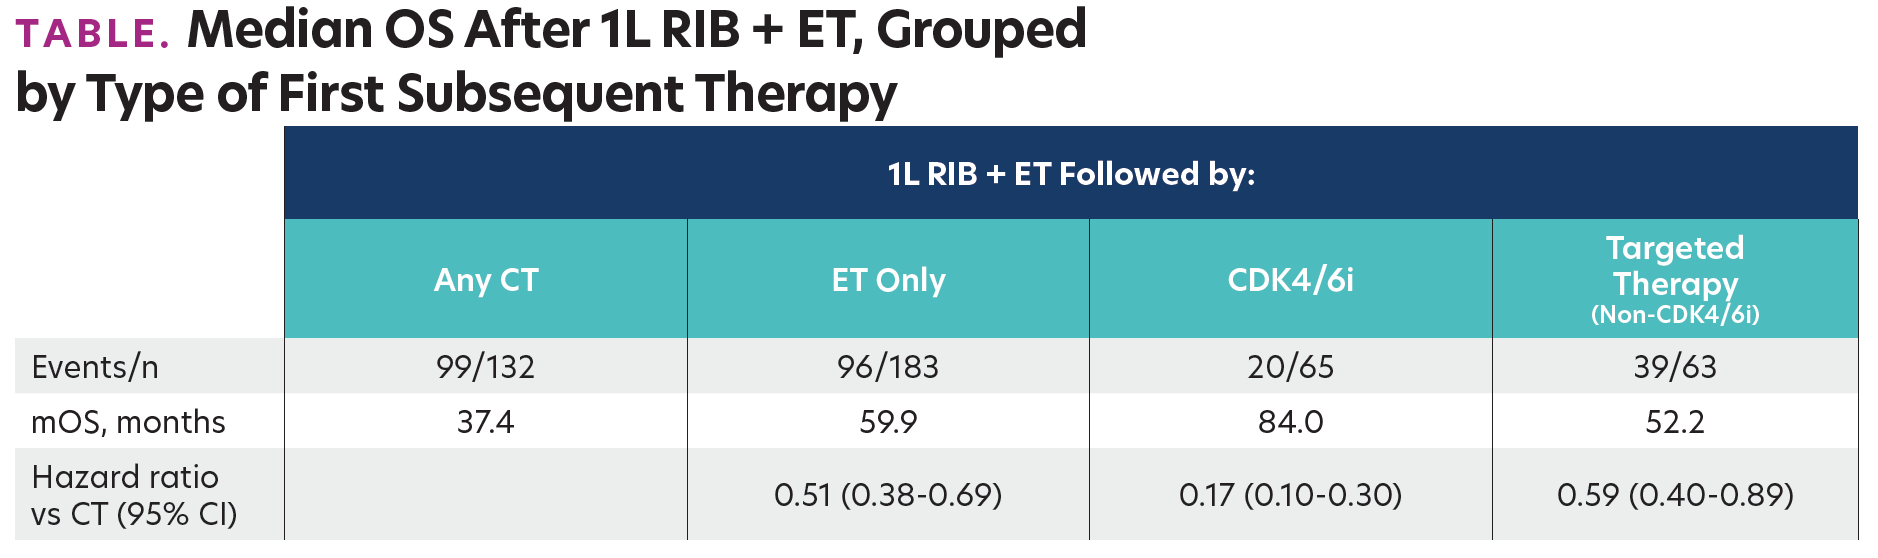 TABLE. Median OS After 1L RIB + ET, Grouped by Type of First Subsequent Therapy